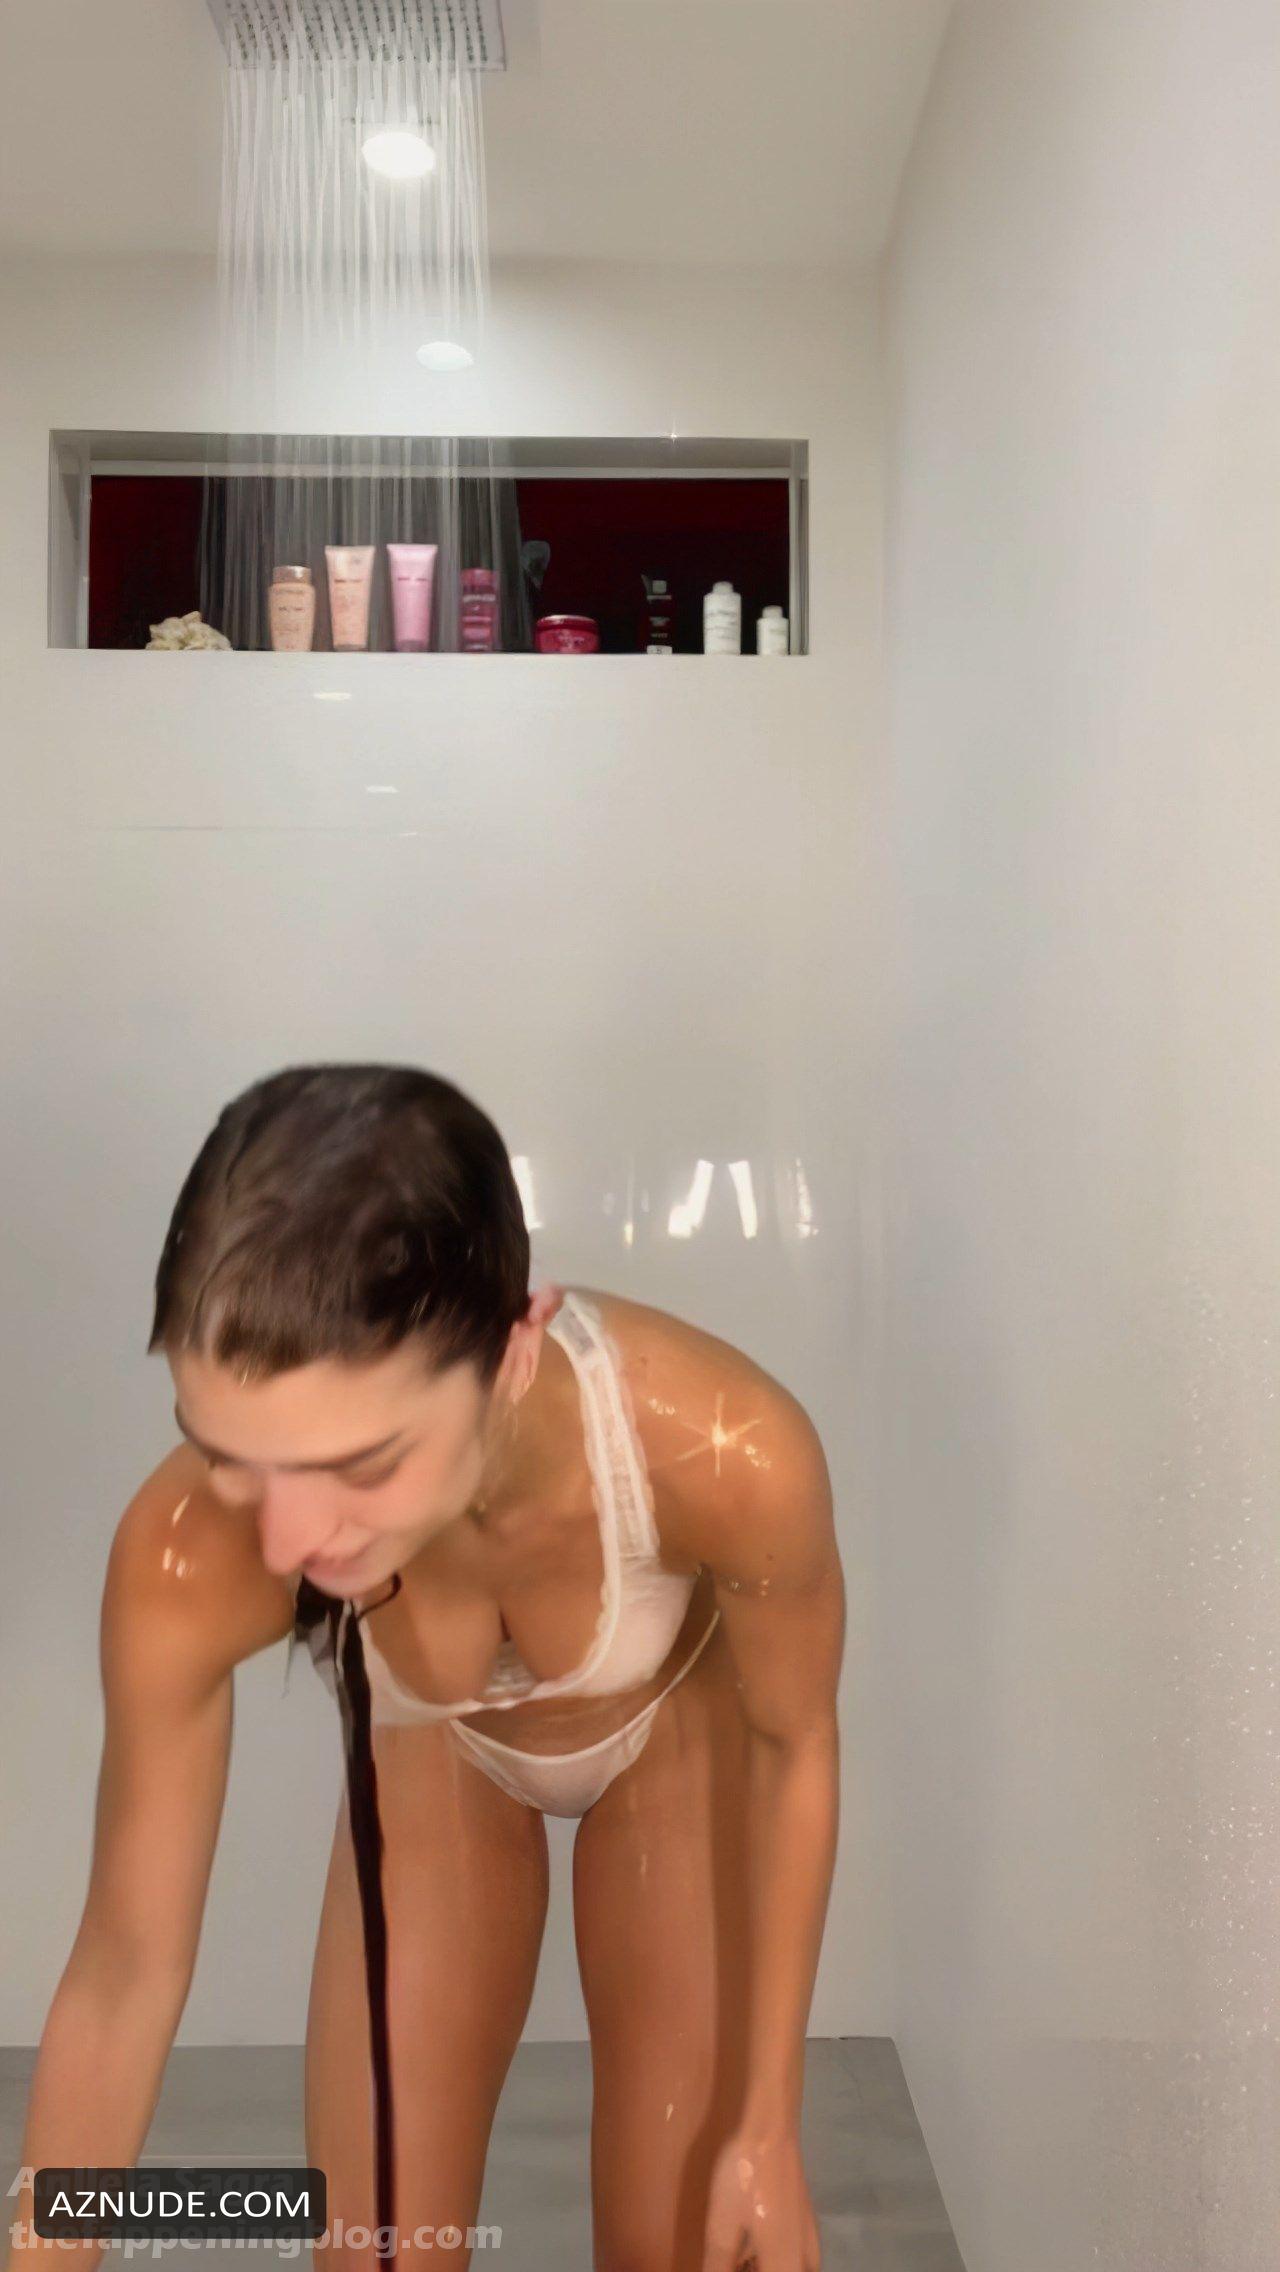 Anllela Sagra Slightly Nude Tits In Lace Lingerie As She Poses Wet In